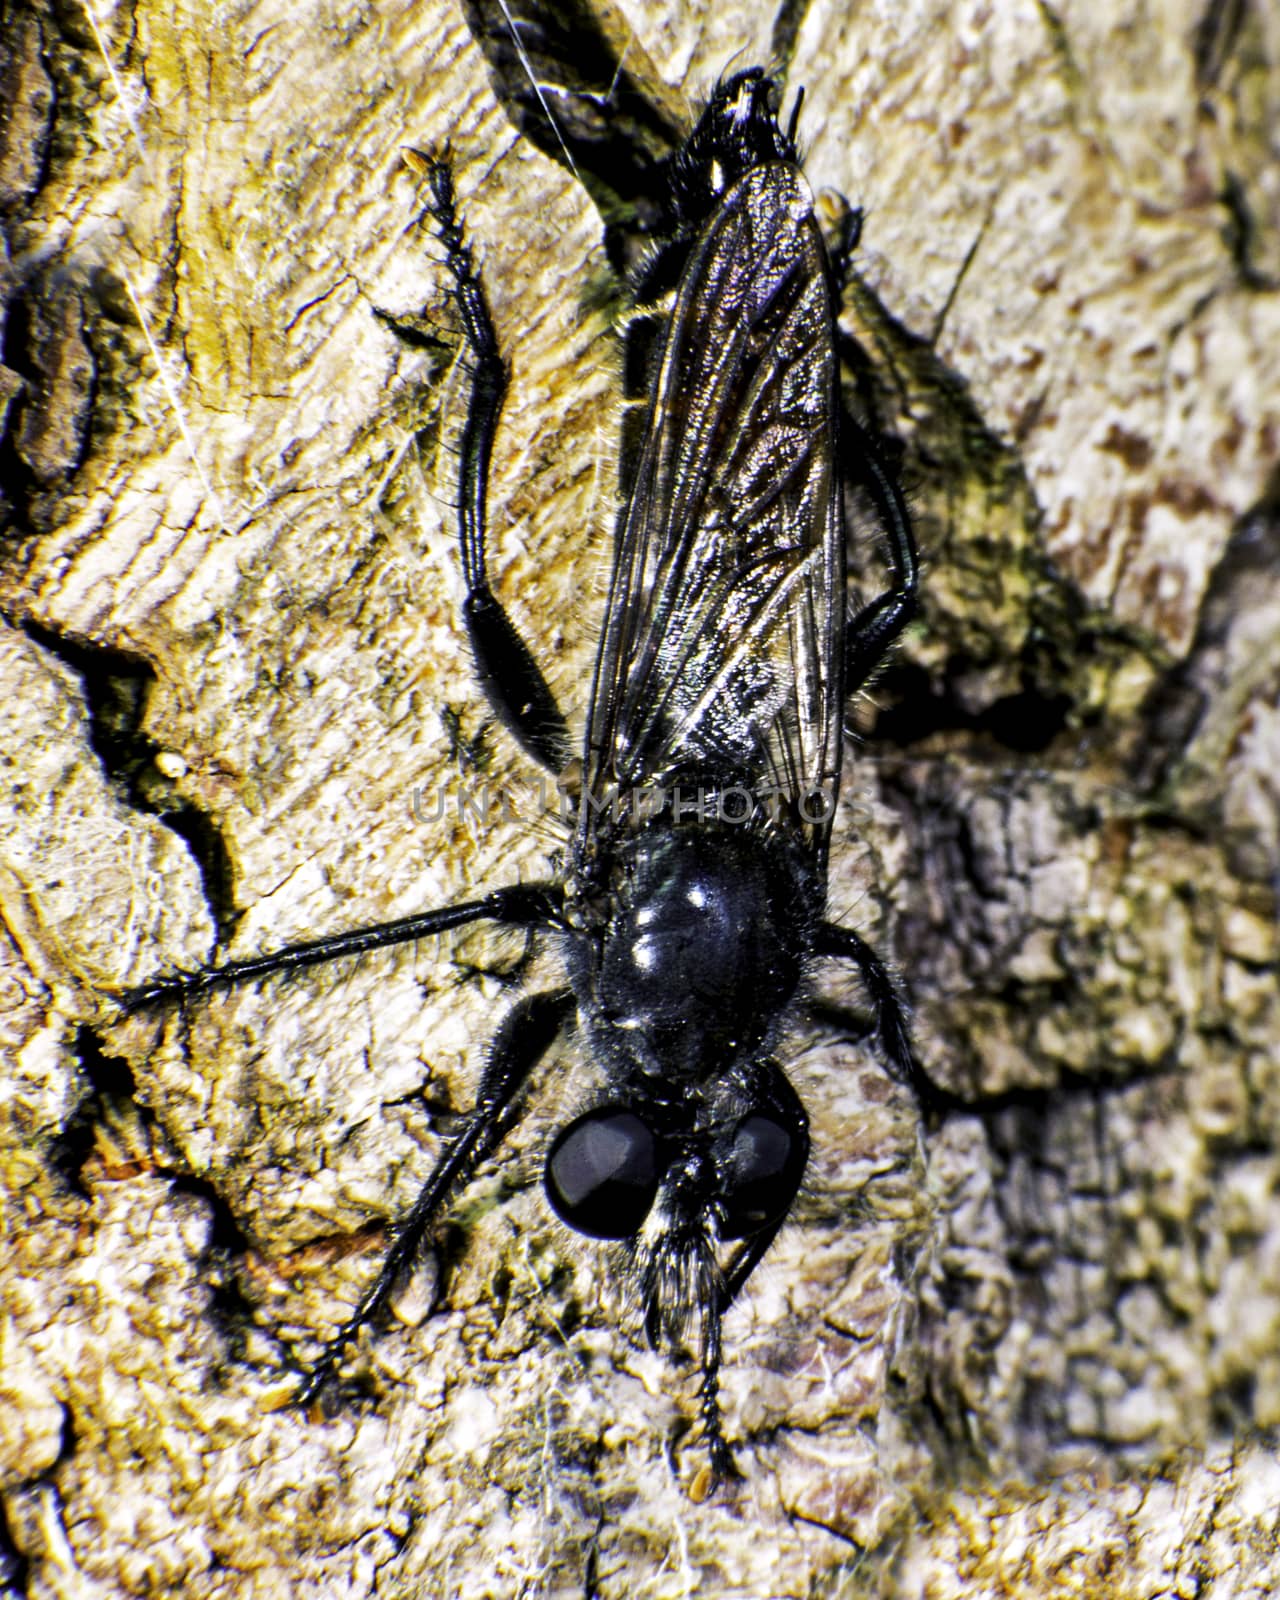 Violet black-legged robber fly on a tree trunk